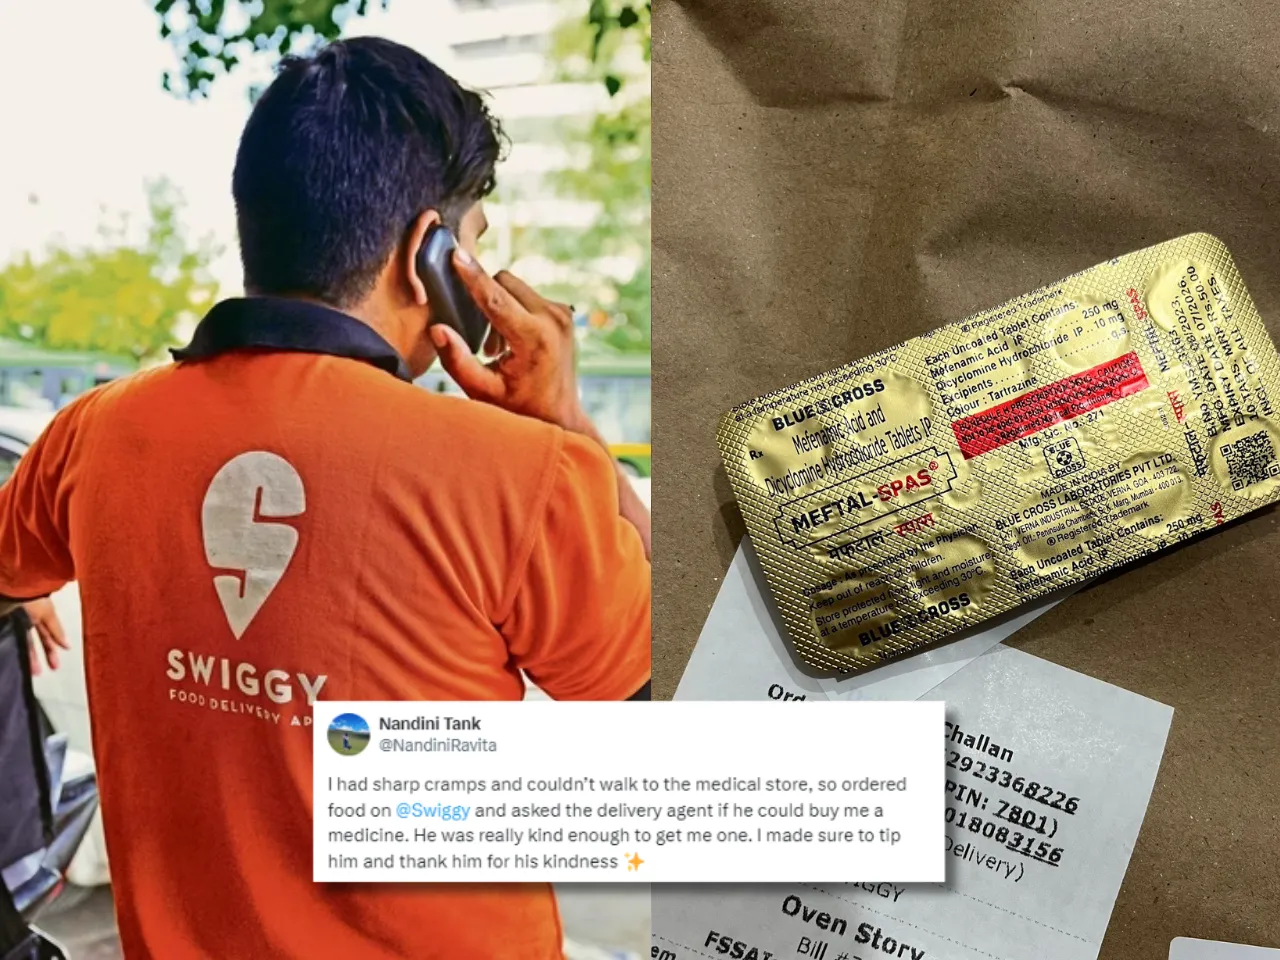 Swiggy delivery man bring medicine for woman suffering from bad period cramps